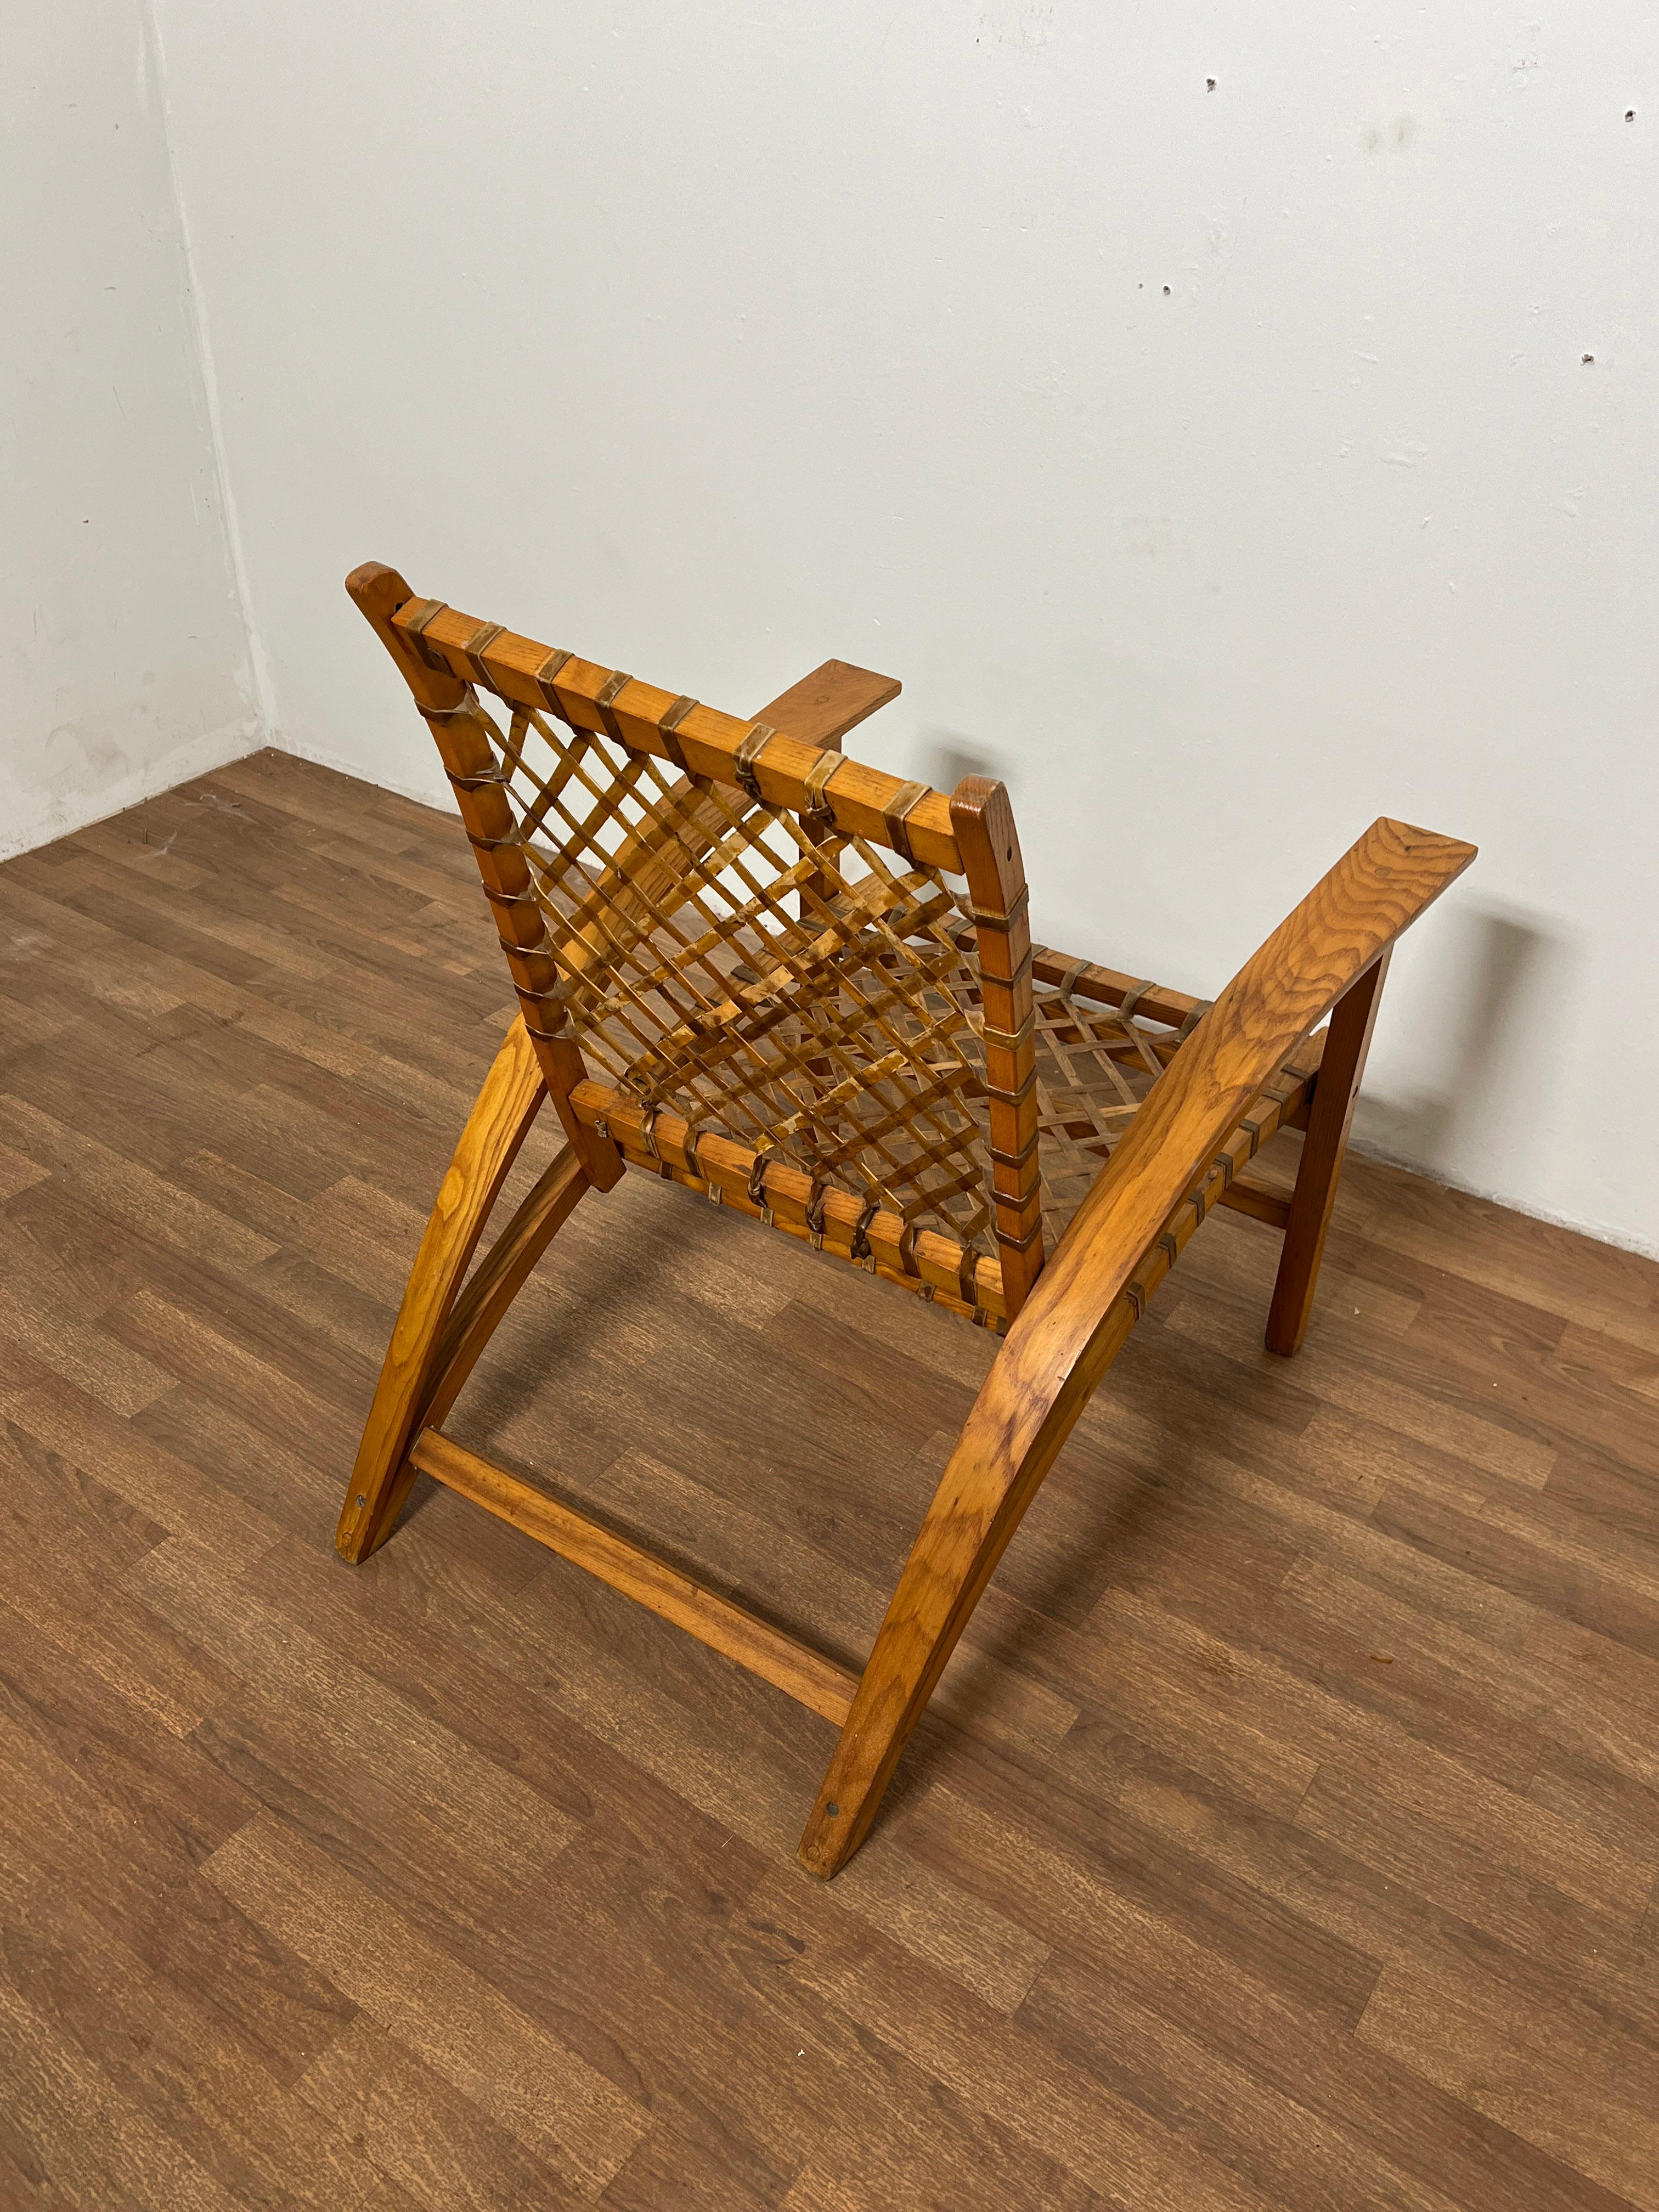 Carl Koch for Vermont Tubbs Sno Shu Chair, Circa 1950s In Good Condition For Sale In Peabody, MA